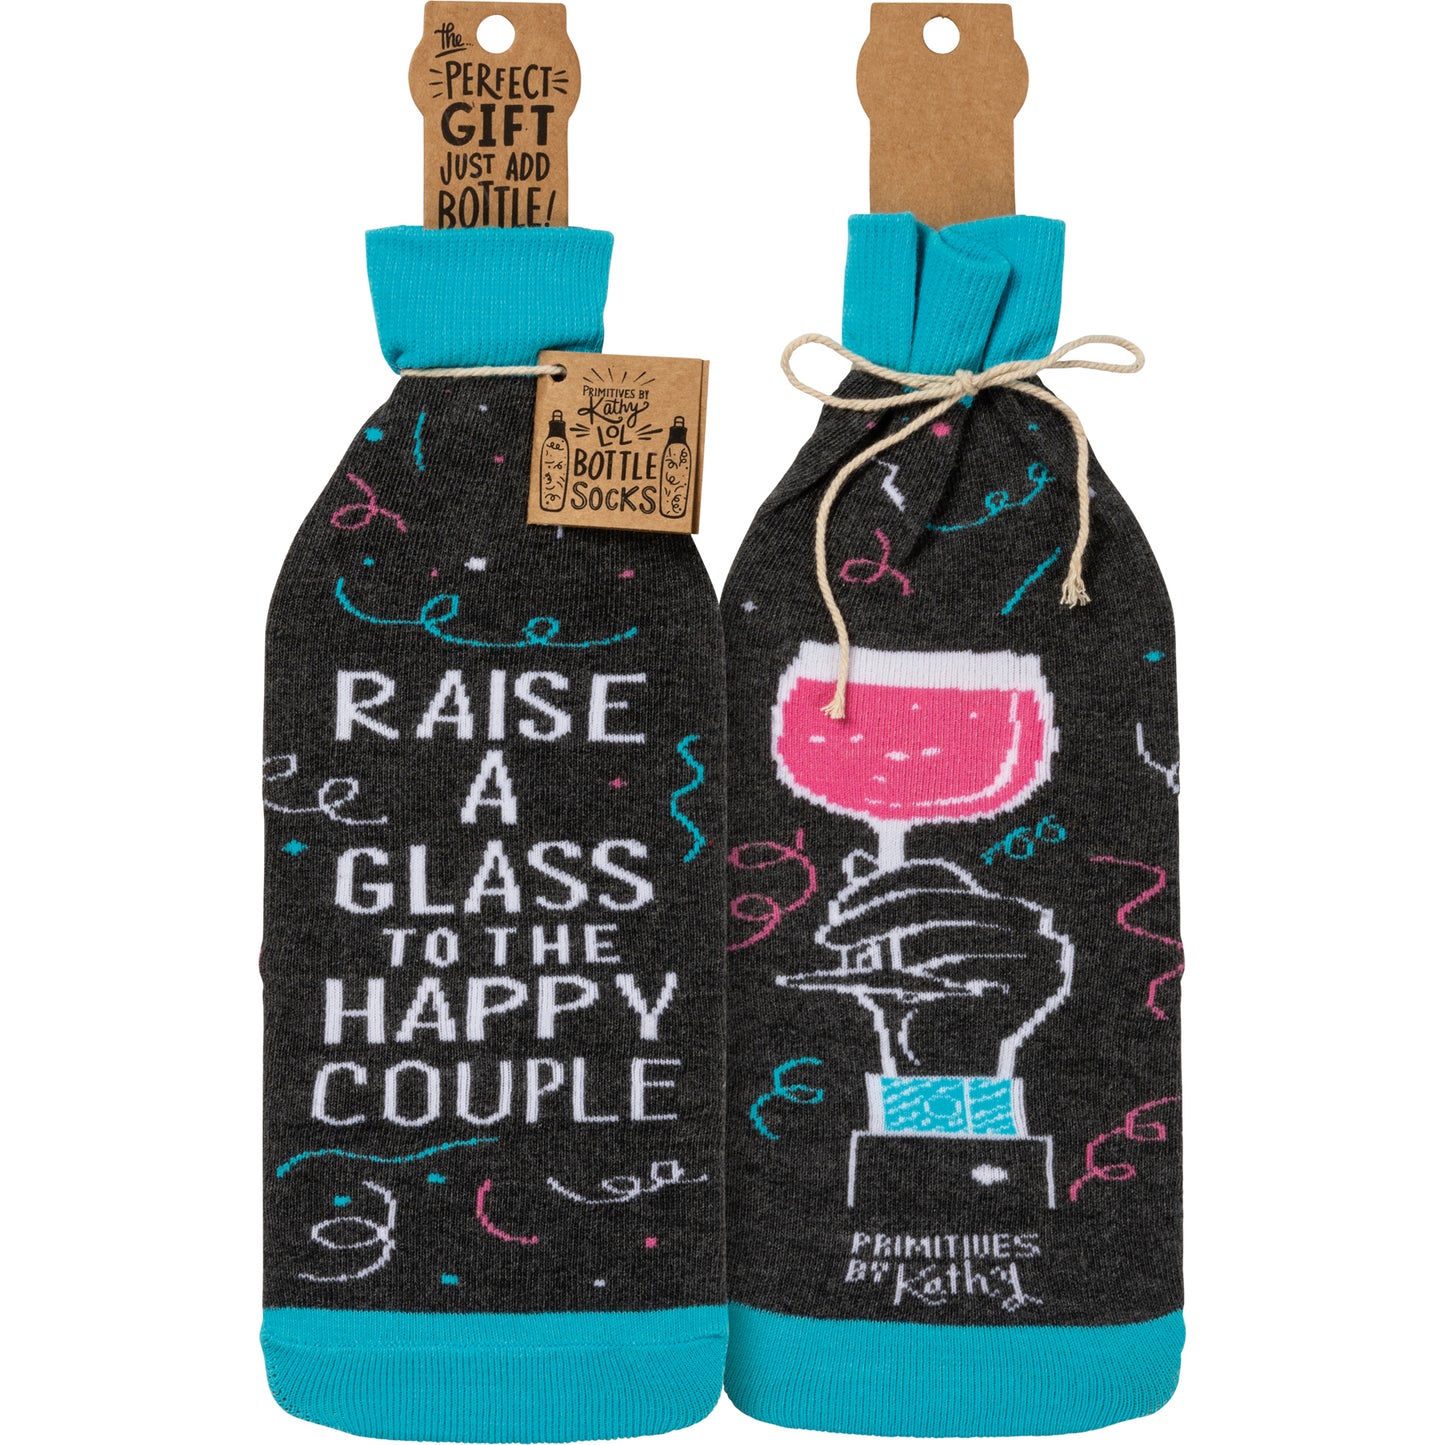 Raise A Glass to the Happy Couple Bottle Sock